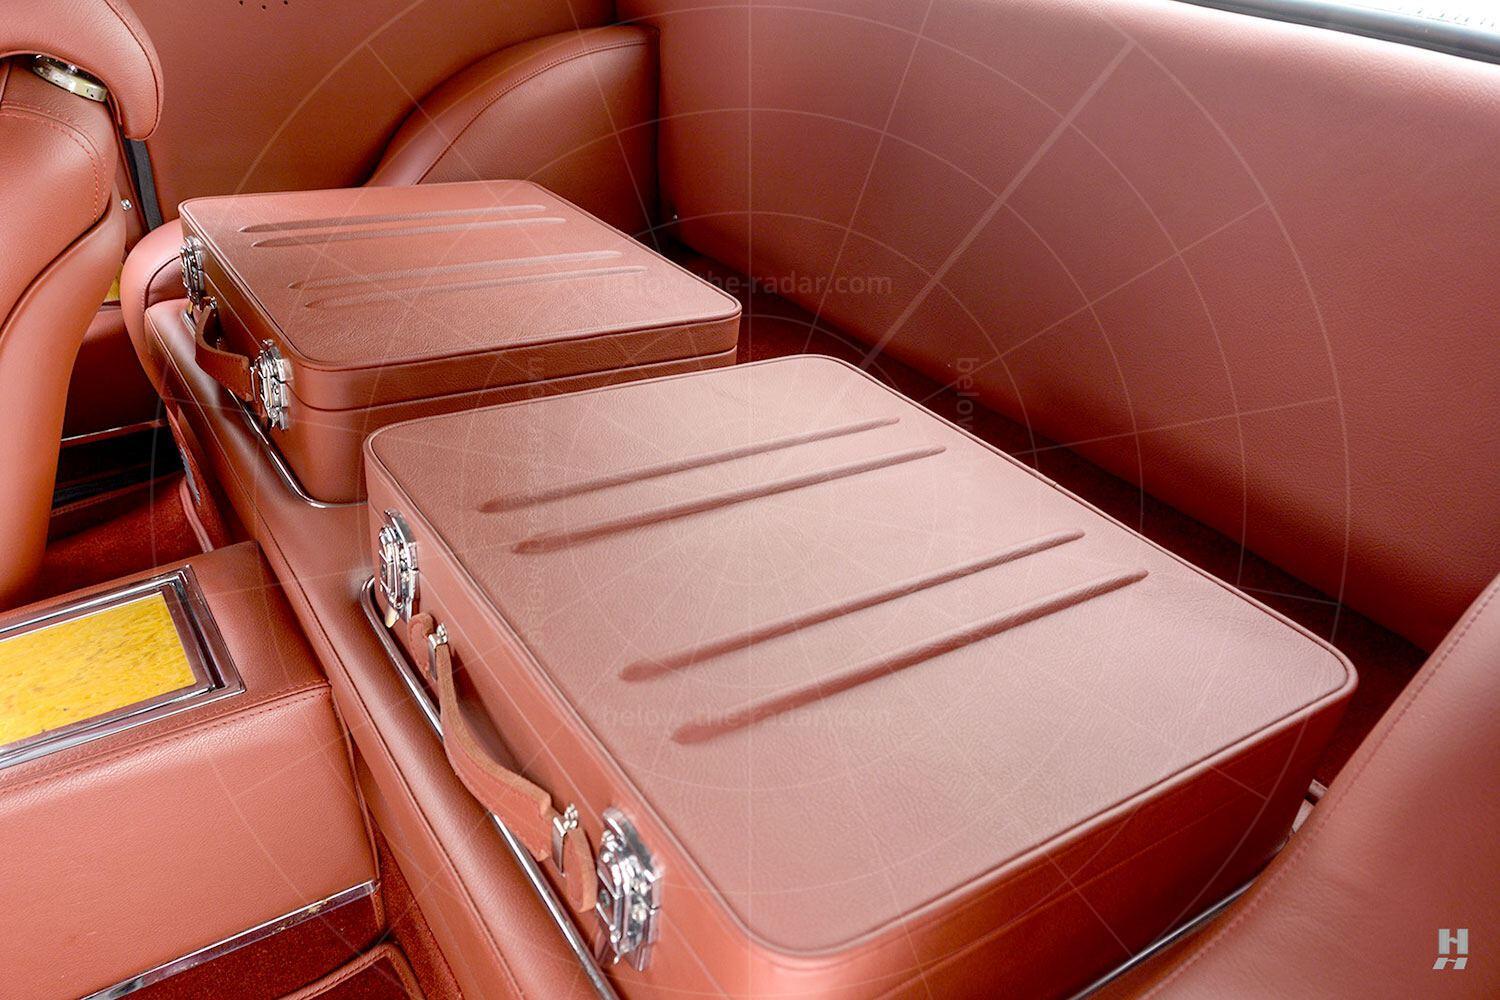 1971 Stutz Blackhawk coupé fitted luggage Pic: Hyman Ltd | 1971 Stutz Blackhawk coupé fitted luggage